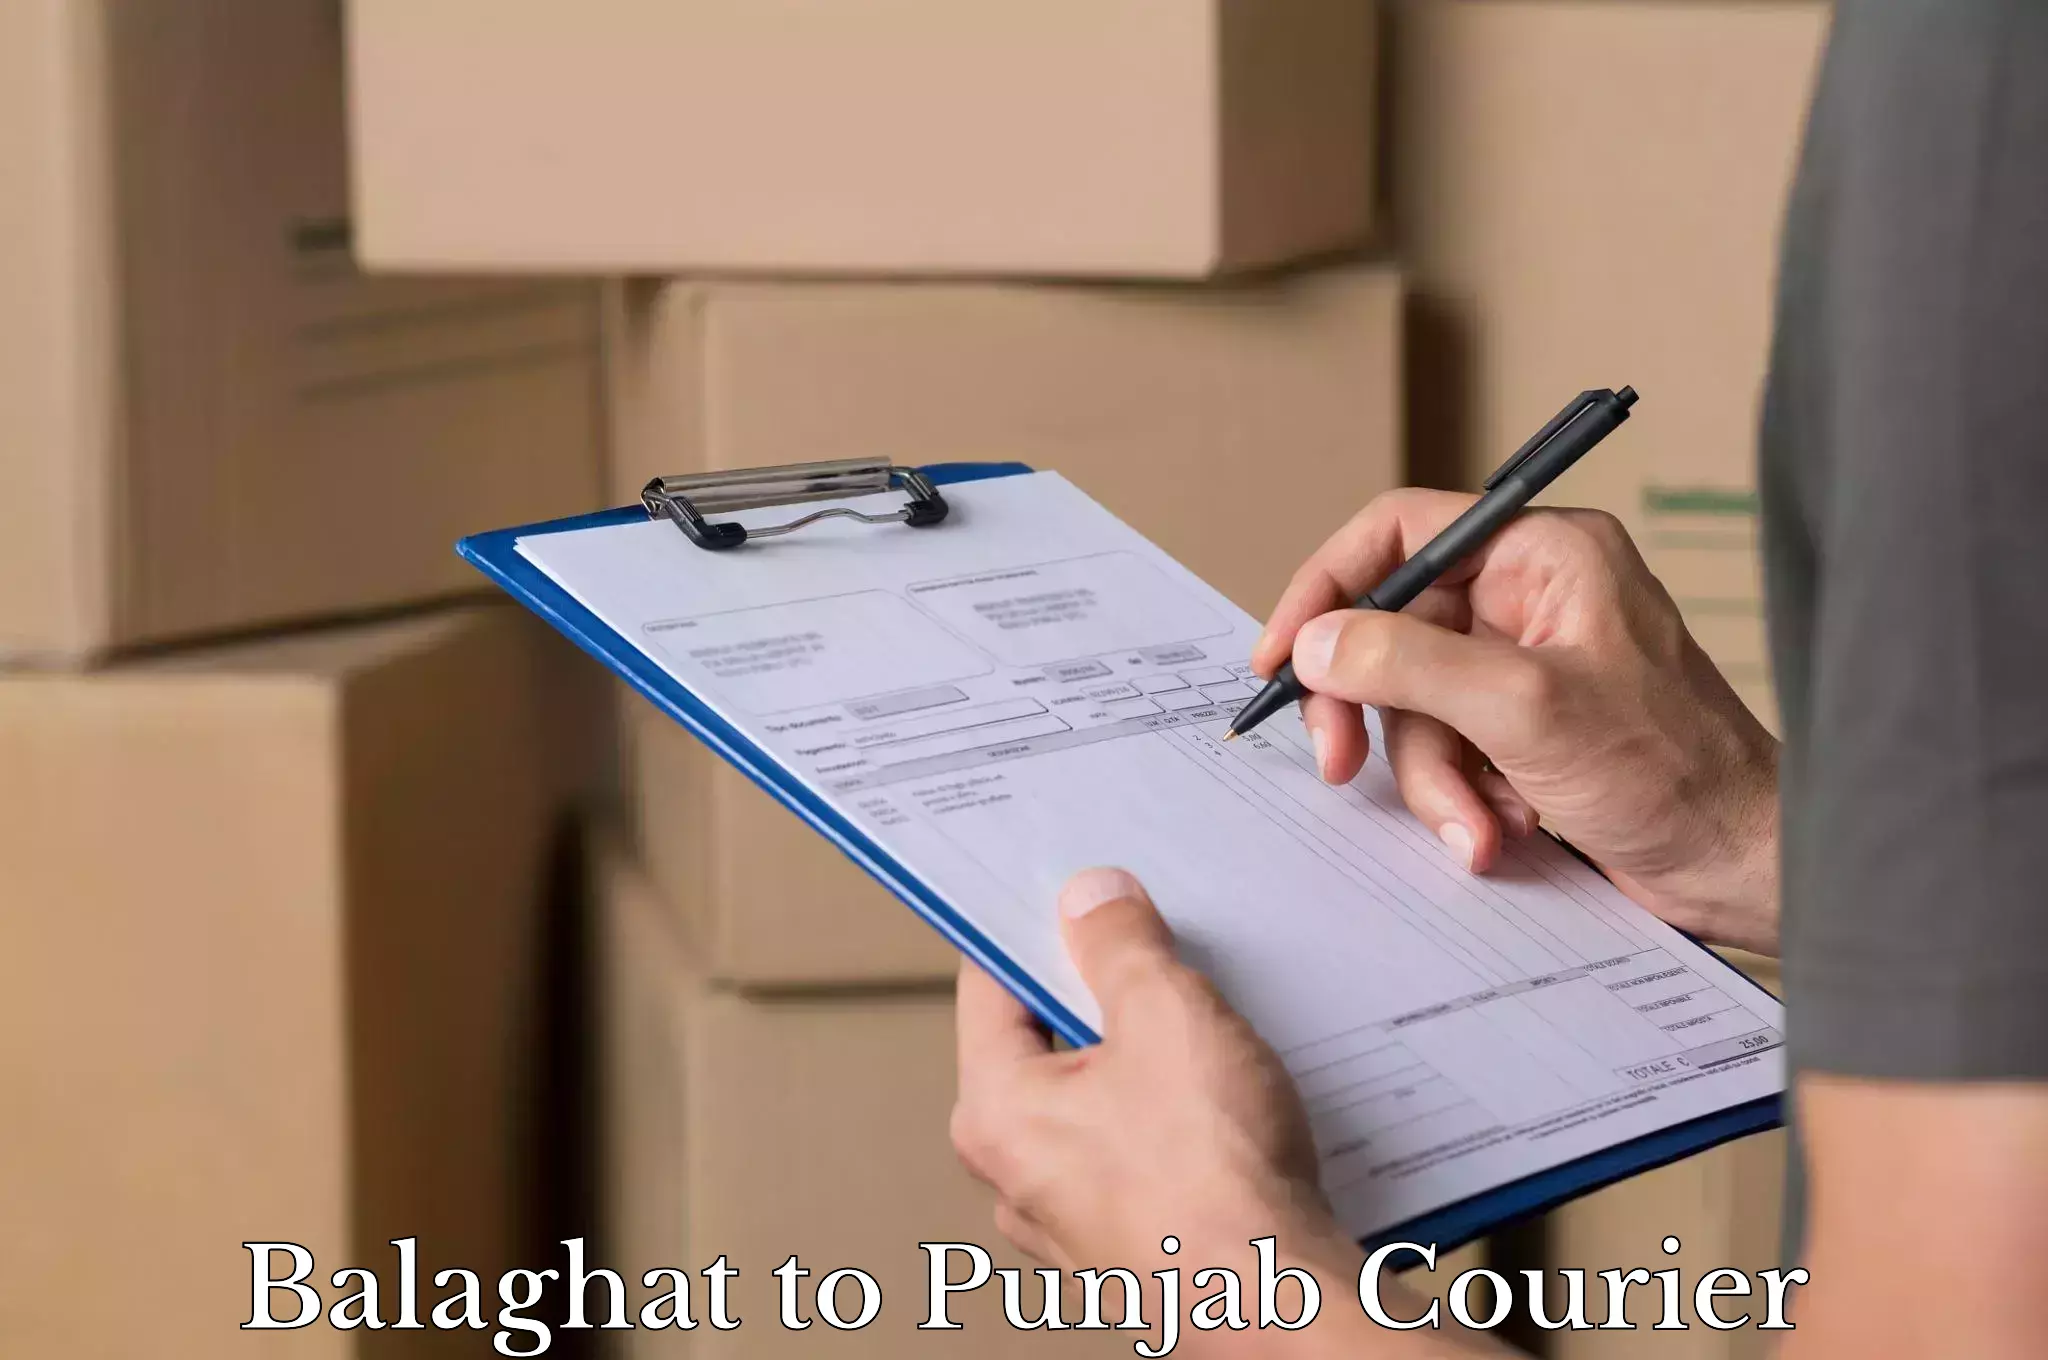 Luggage transport consultancy Balaghat to Mohali